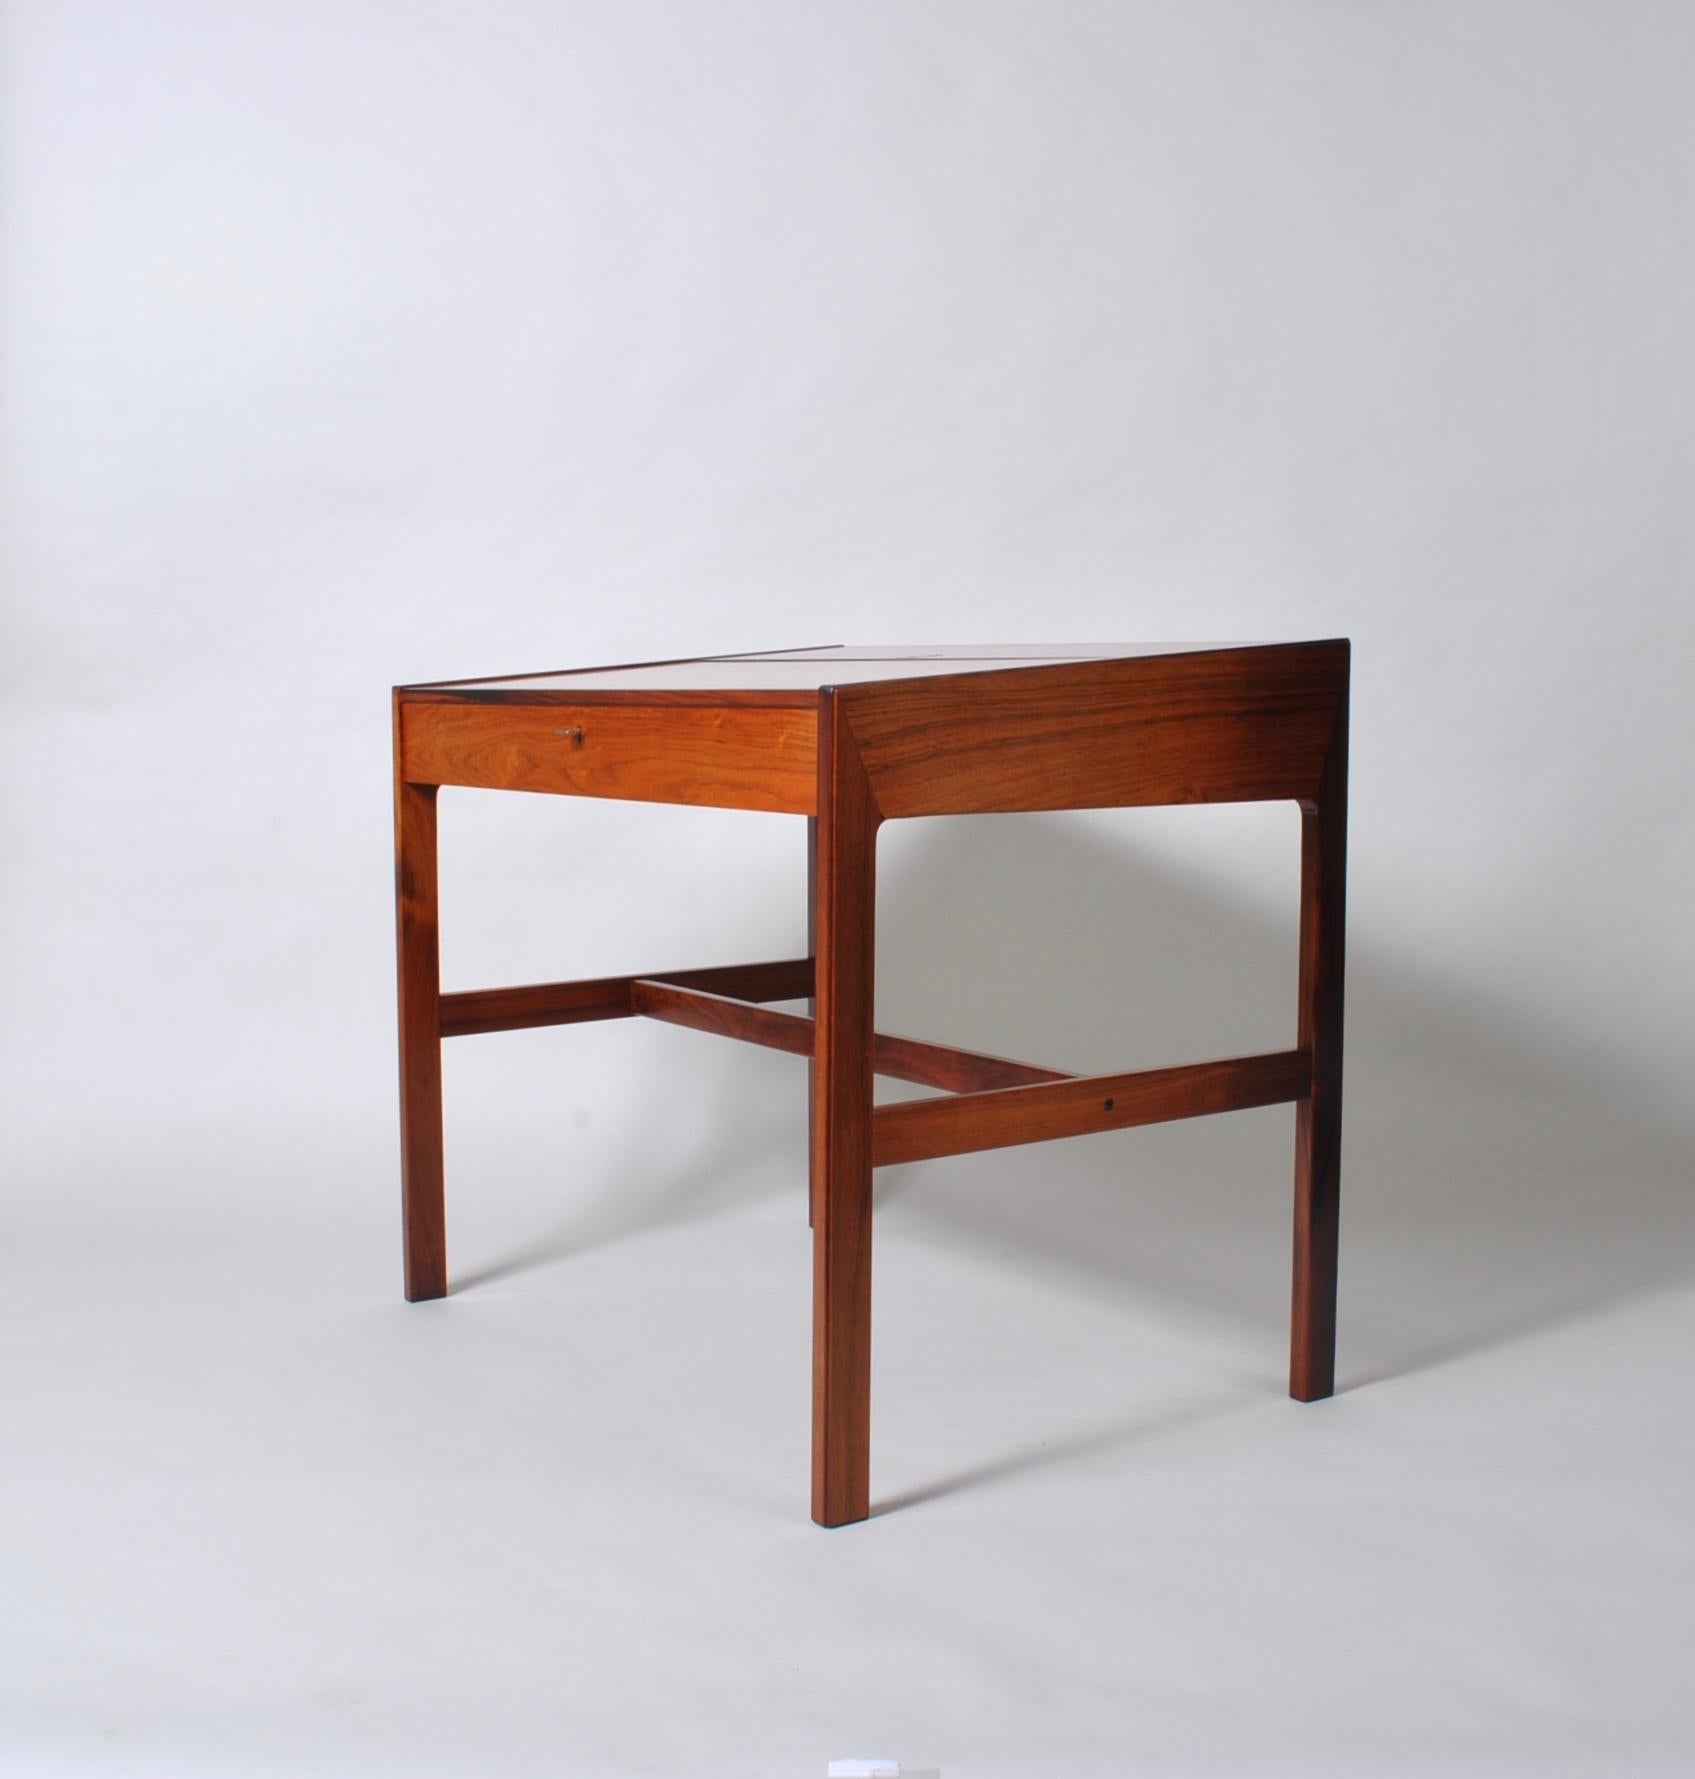 Superb Danish rosewood modernist desk or vanity by Arne Wahl Iversen for Vinde Mobelfabrik, Denmark, circa 1960.
Lovely rosewood construction with a flip top hatch revealing a multi compartment interior and mirror. Lockable front drawer. Wonderful